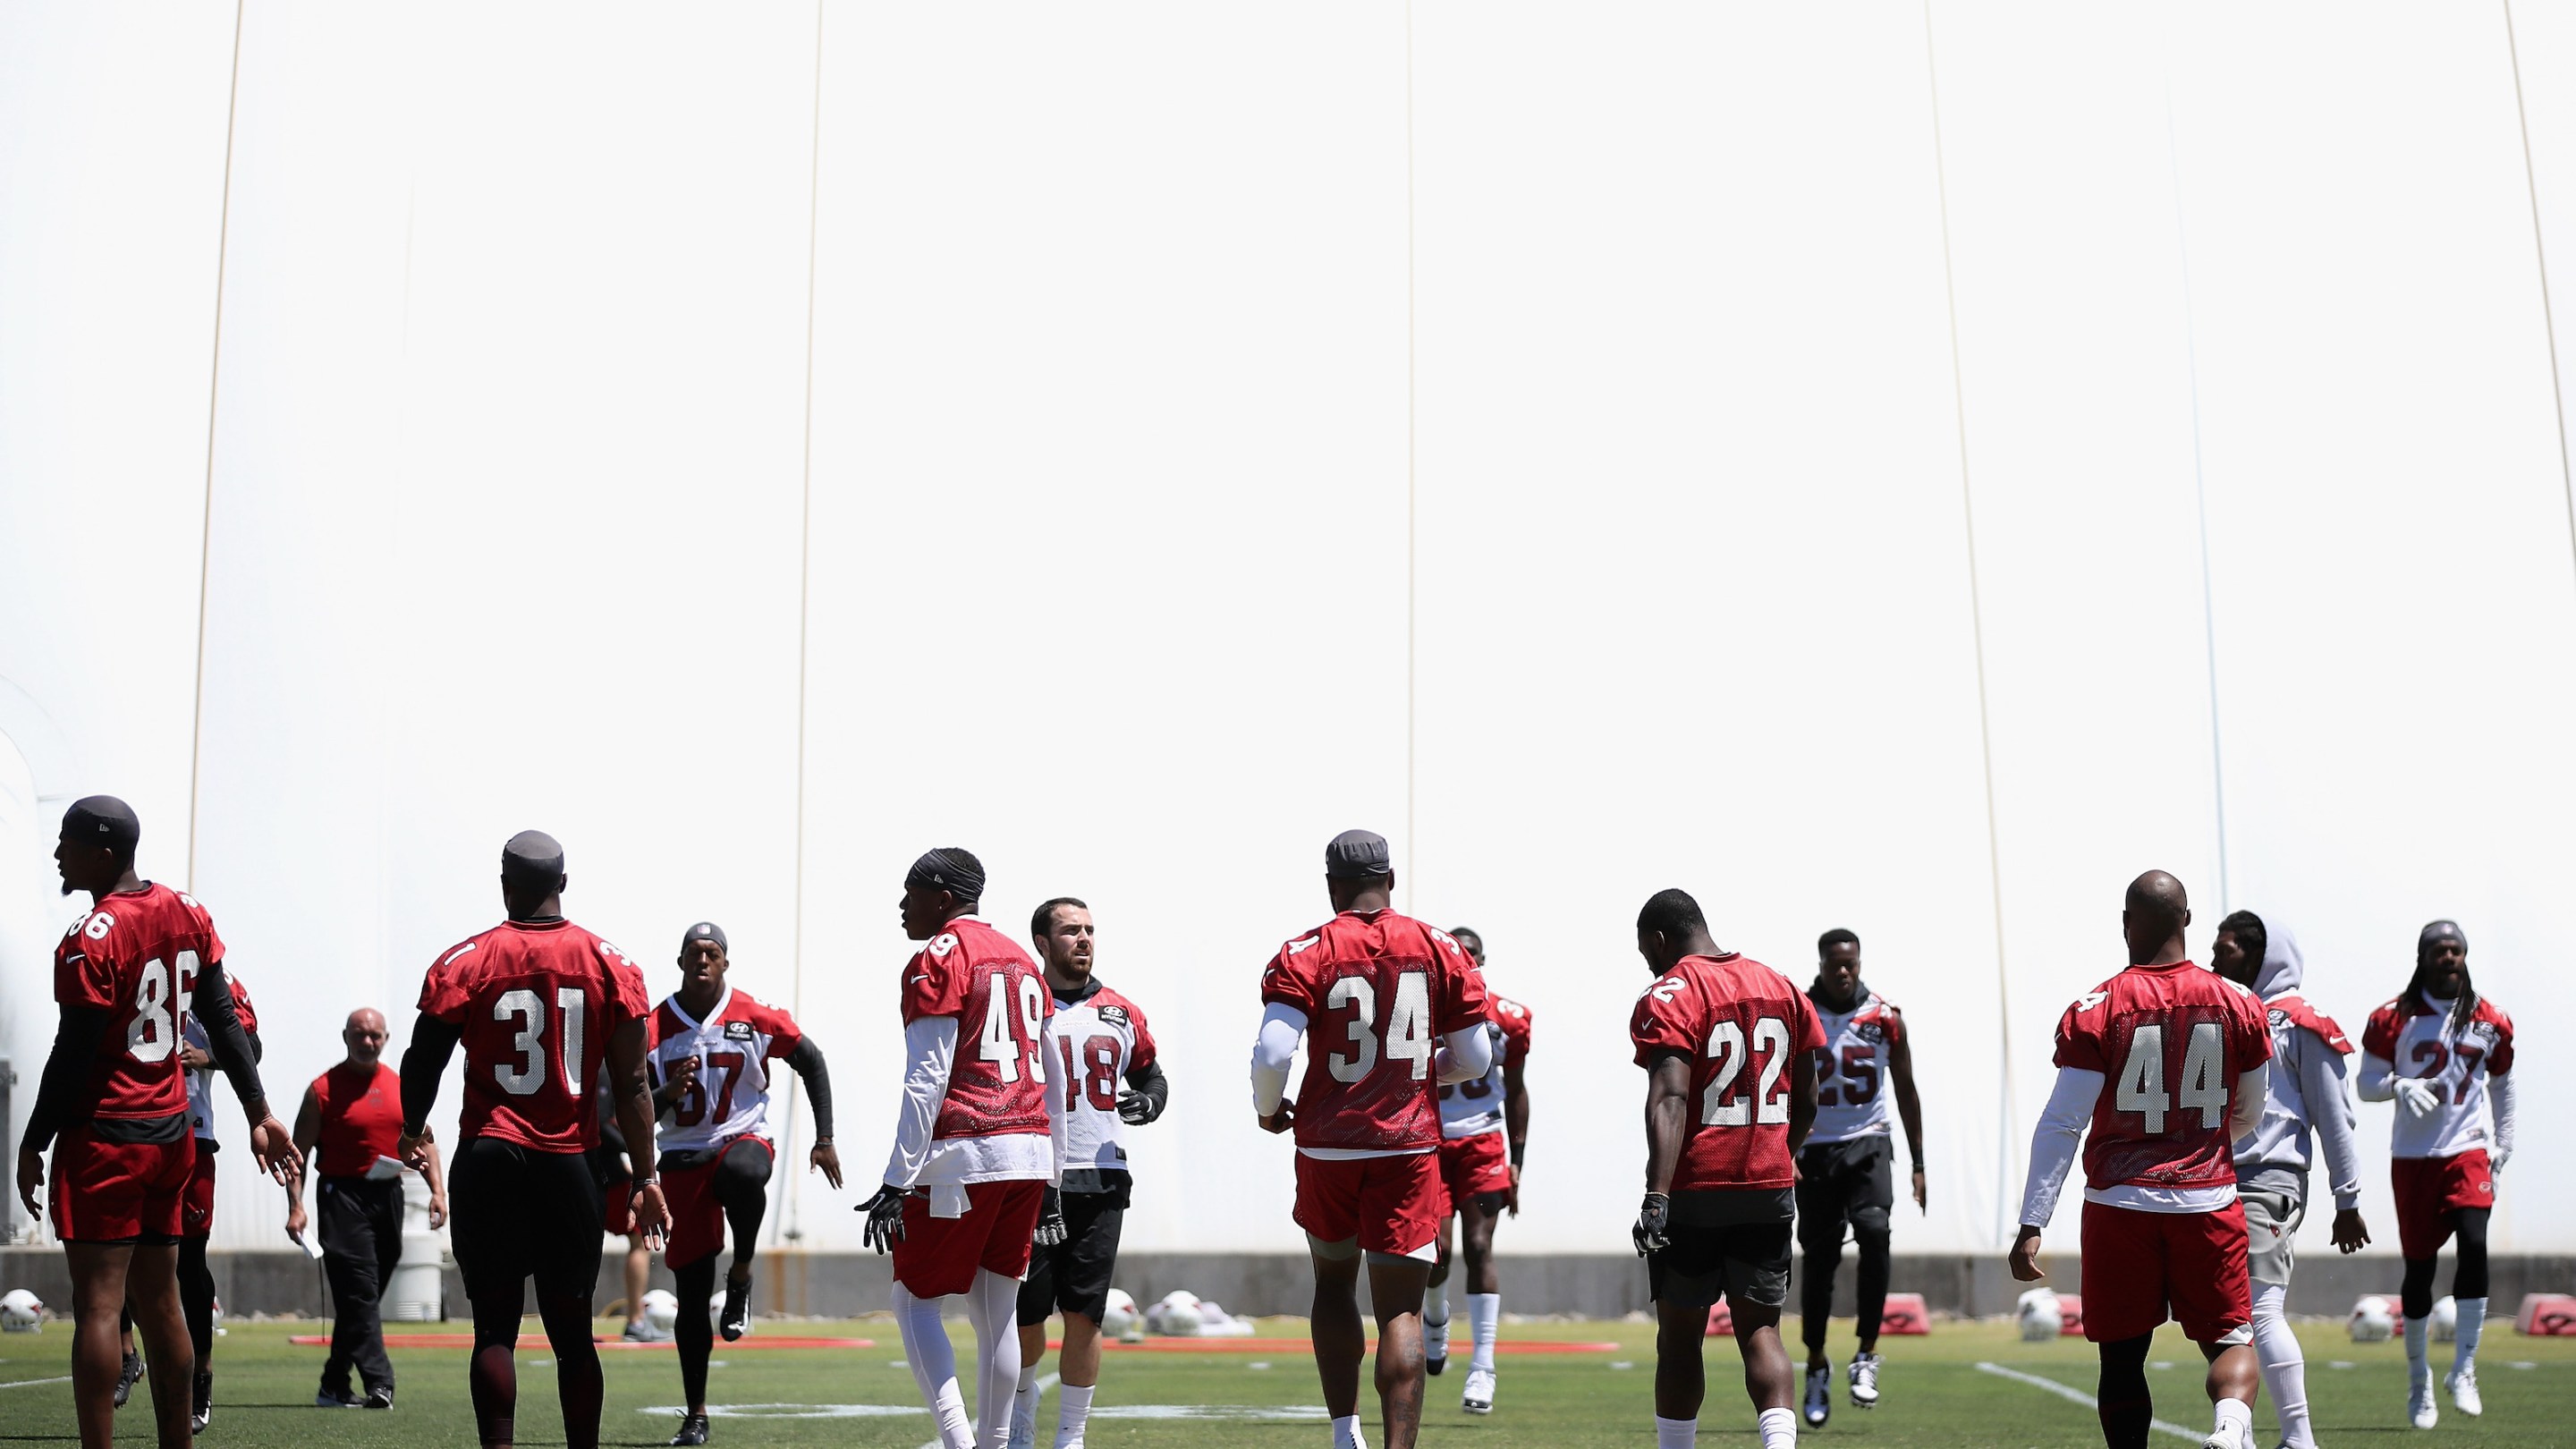 The Arizona Cardinals doing OTA's at the Dignity Health Arizona Cardinals Training Center. The NFLPA survey suggests that it "smells crazy in there."